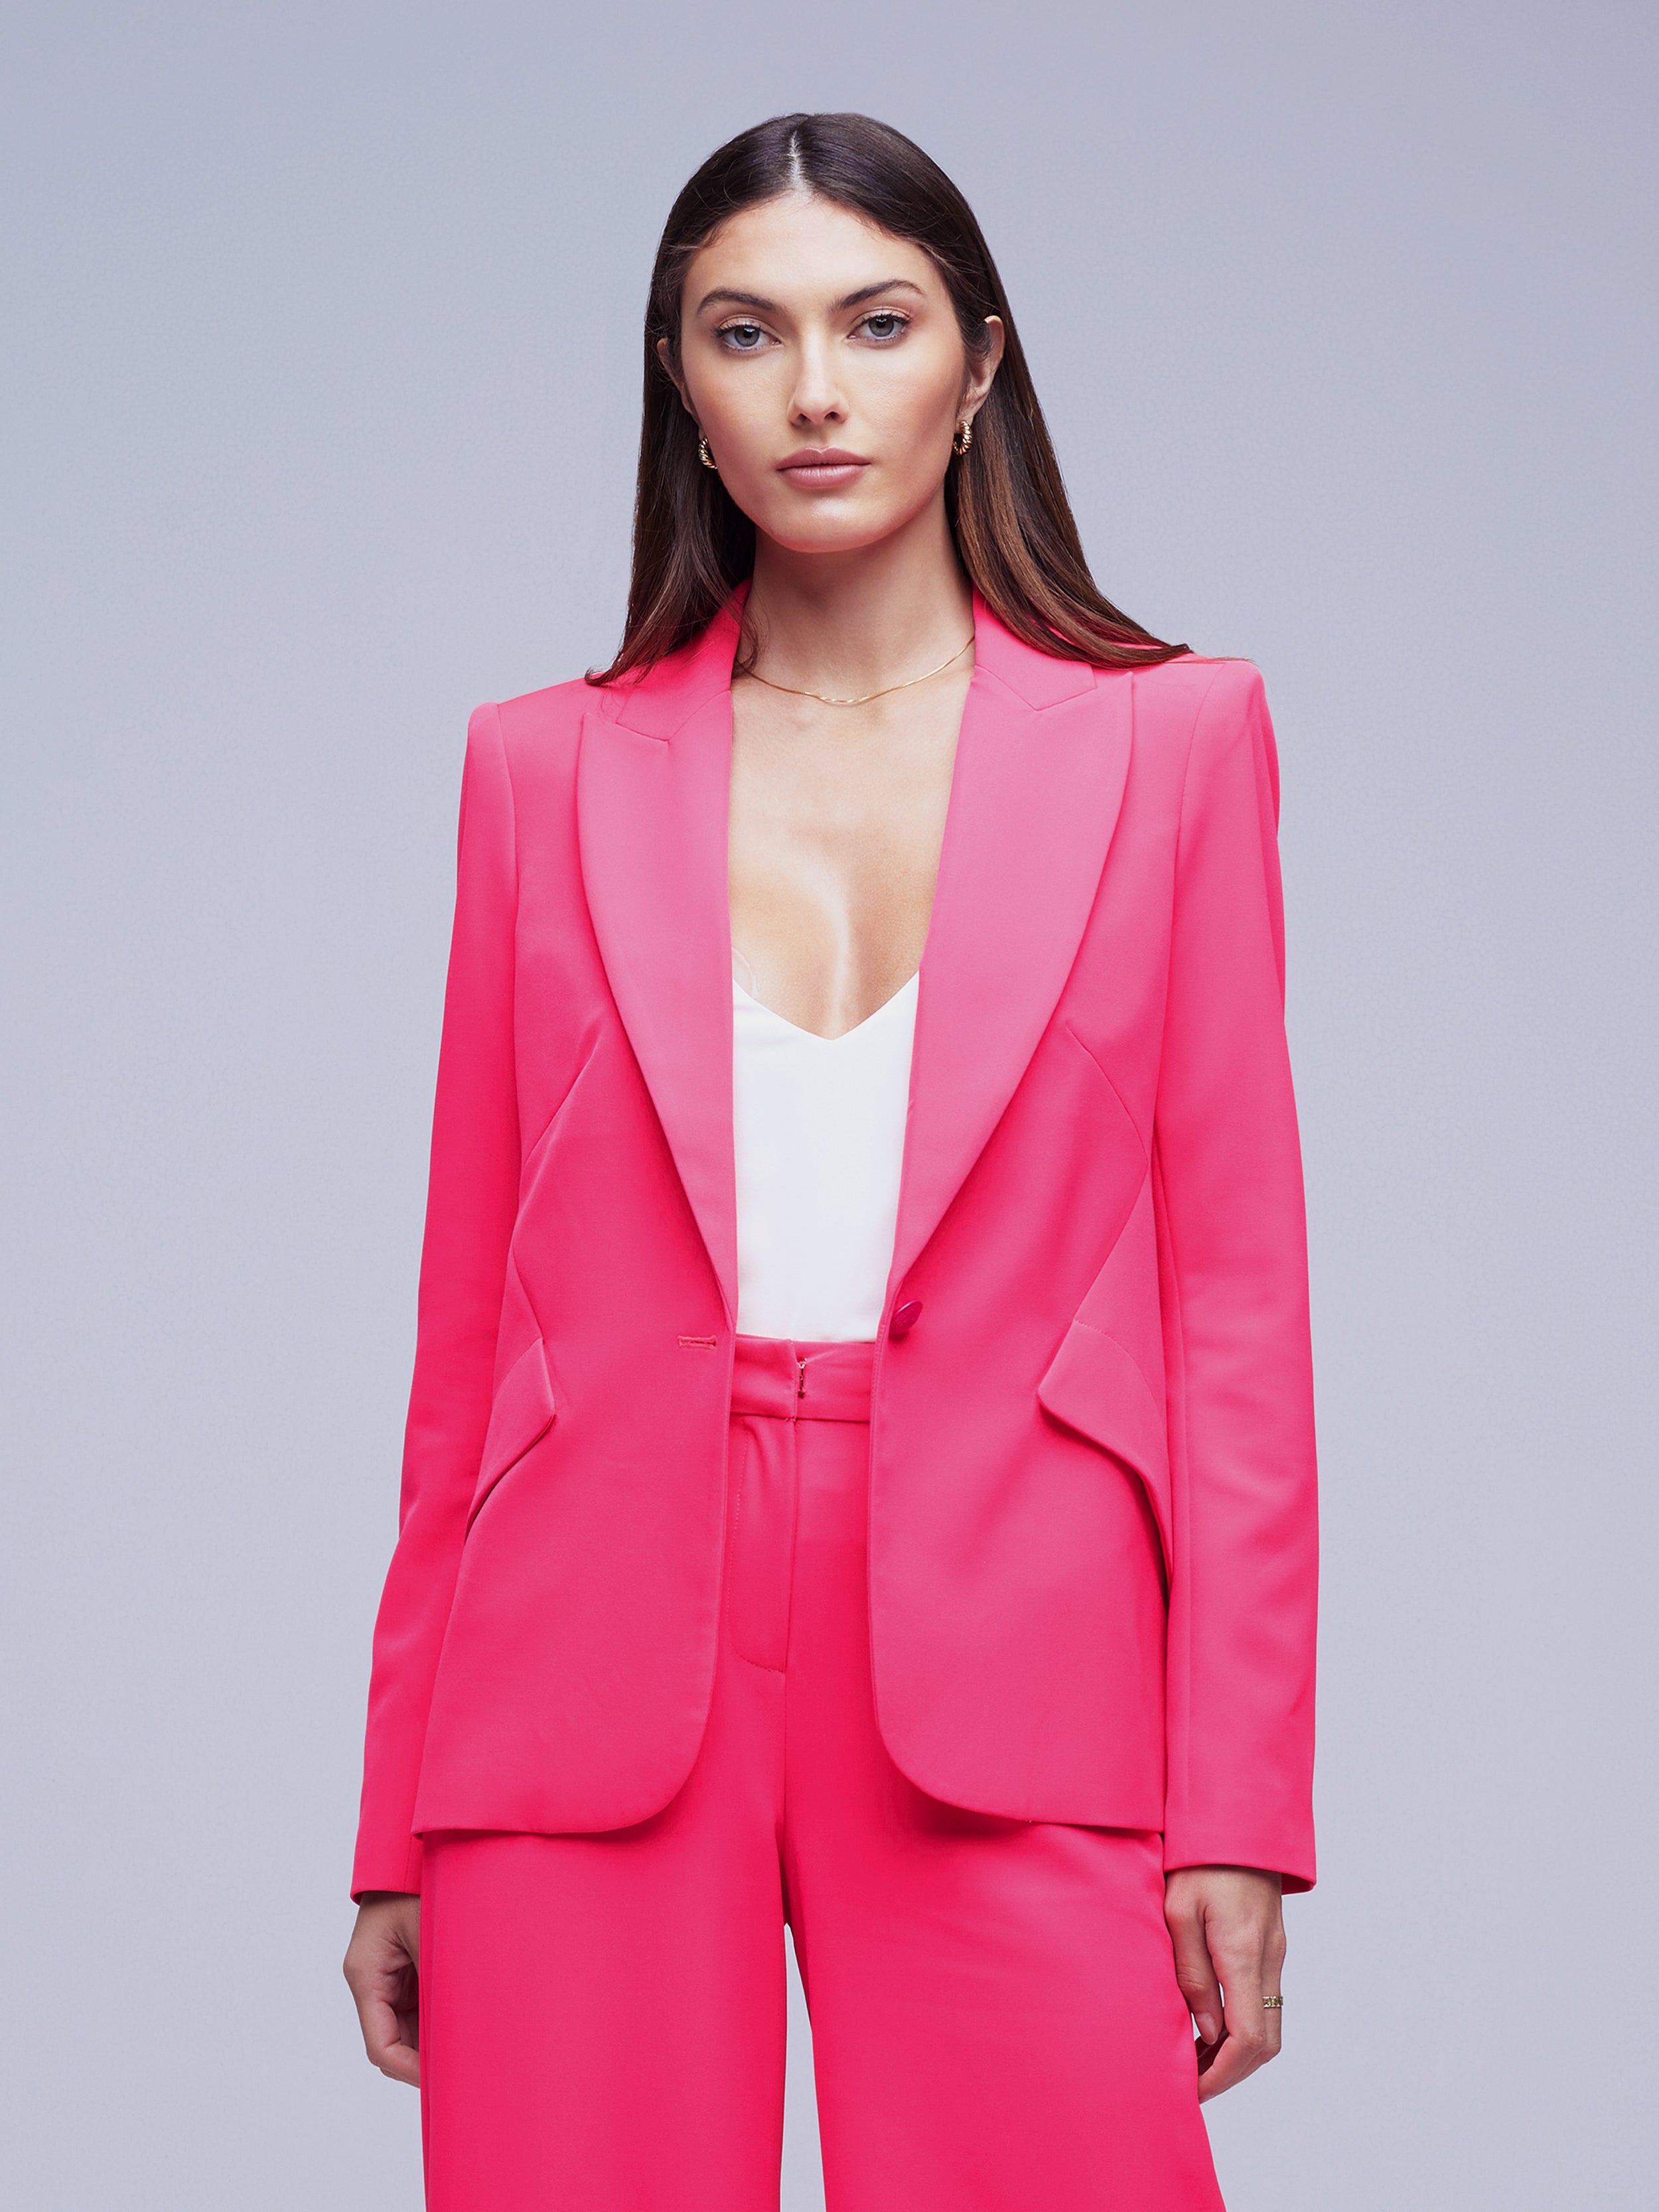 Hot Pink Blazer Trouser Suit Set for Women, Pink Pantsuit With Oversized  Blazer and Wide Leg Pants, Women's Business Suit Pink -  Canada